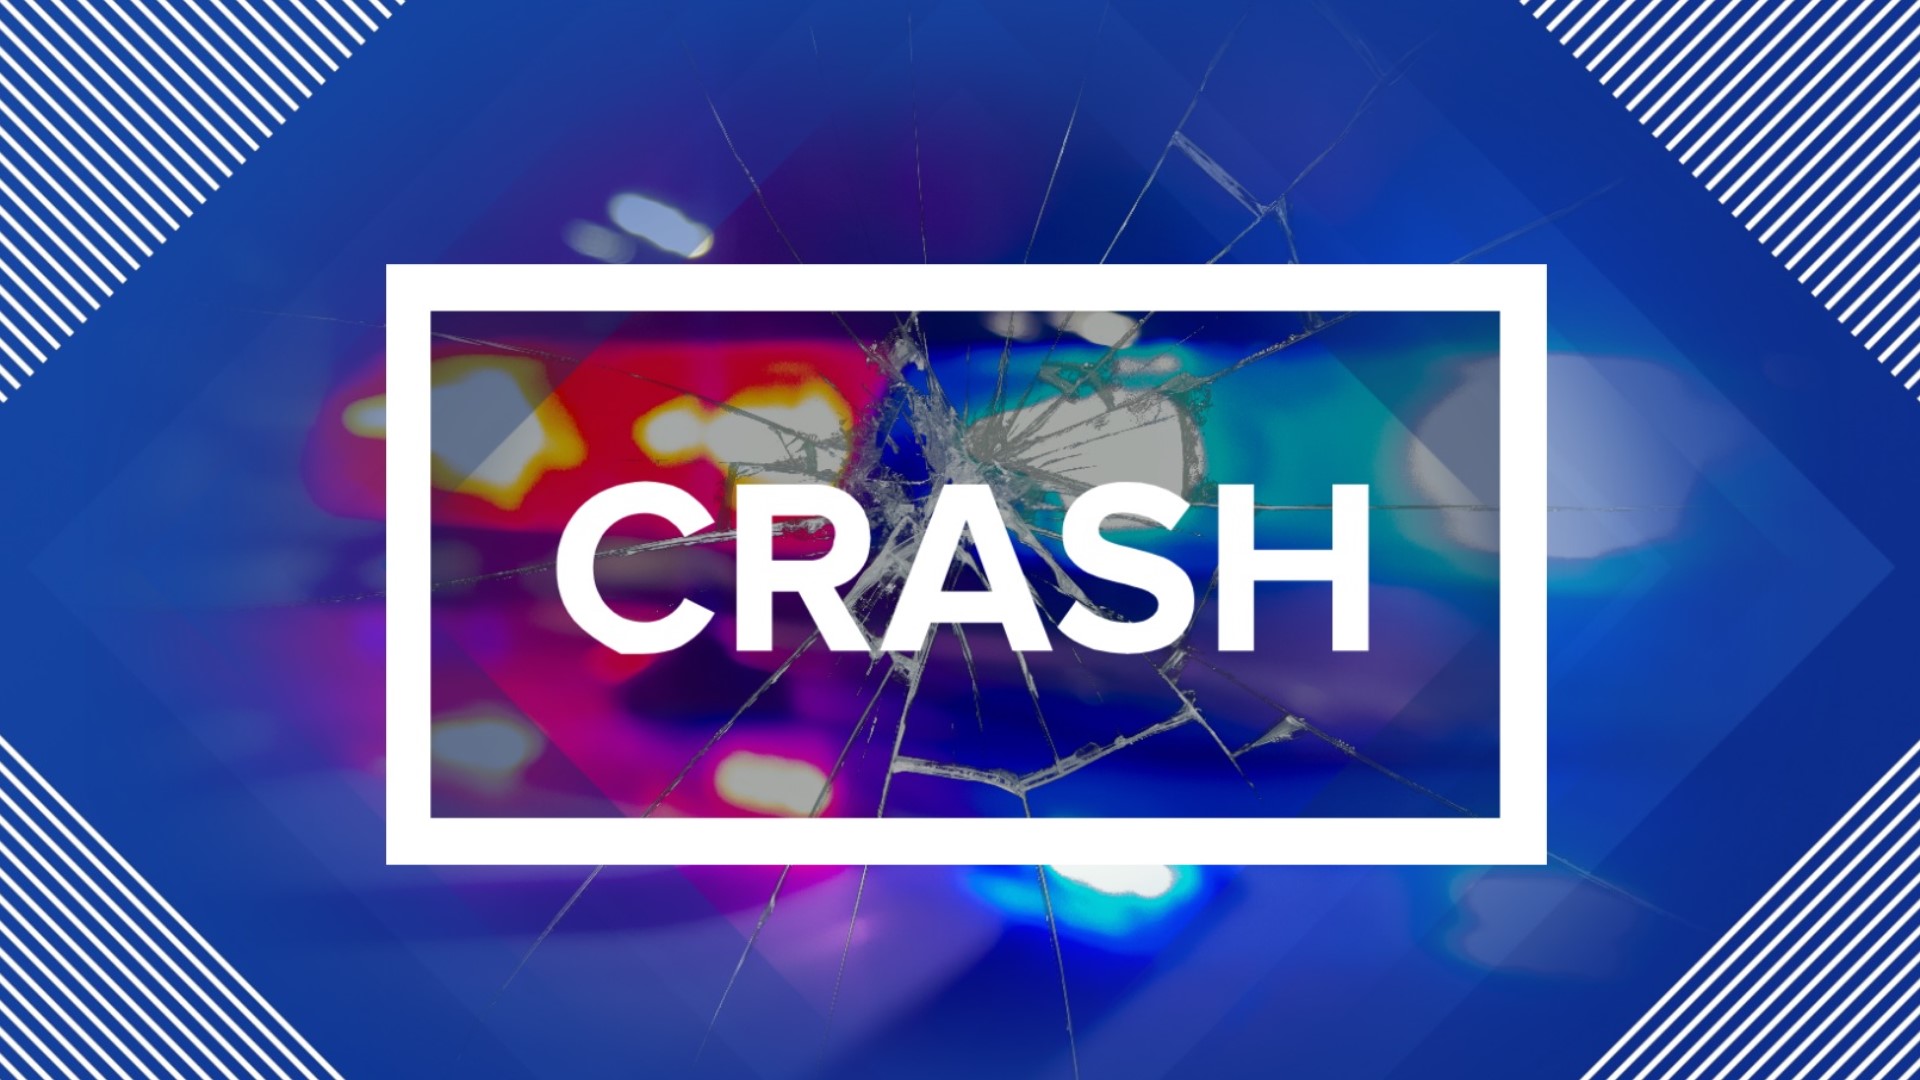 The crash happened around 9:30 p.m. Tuesday in Loyalsock Township near Montoursville.